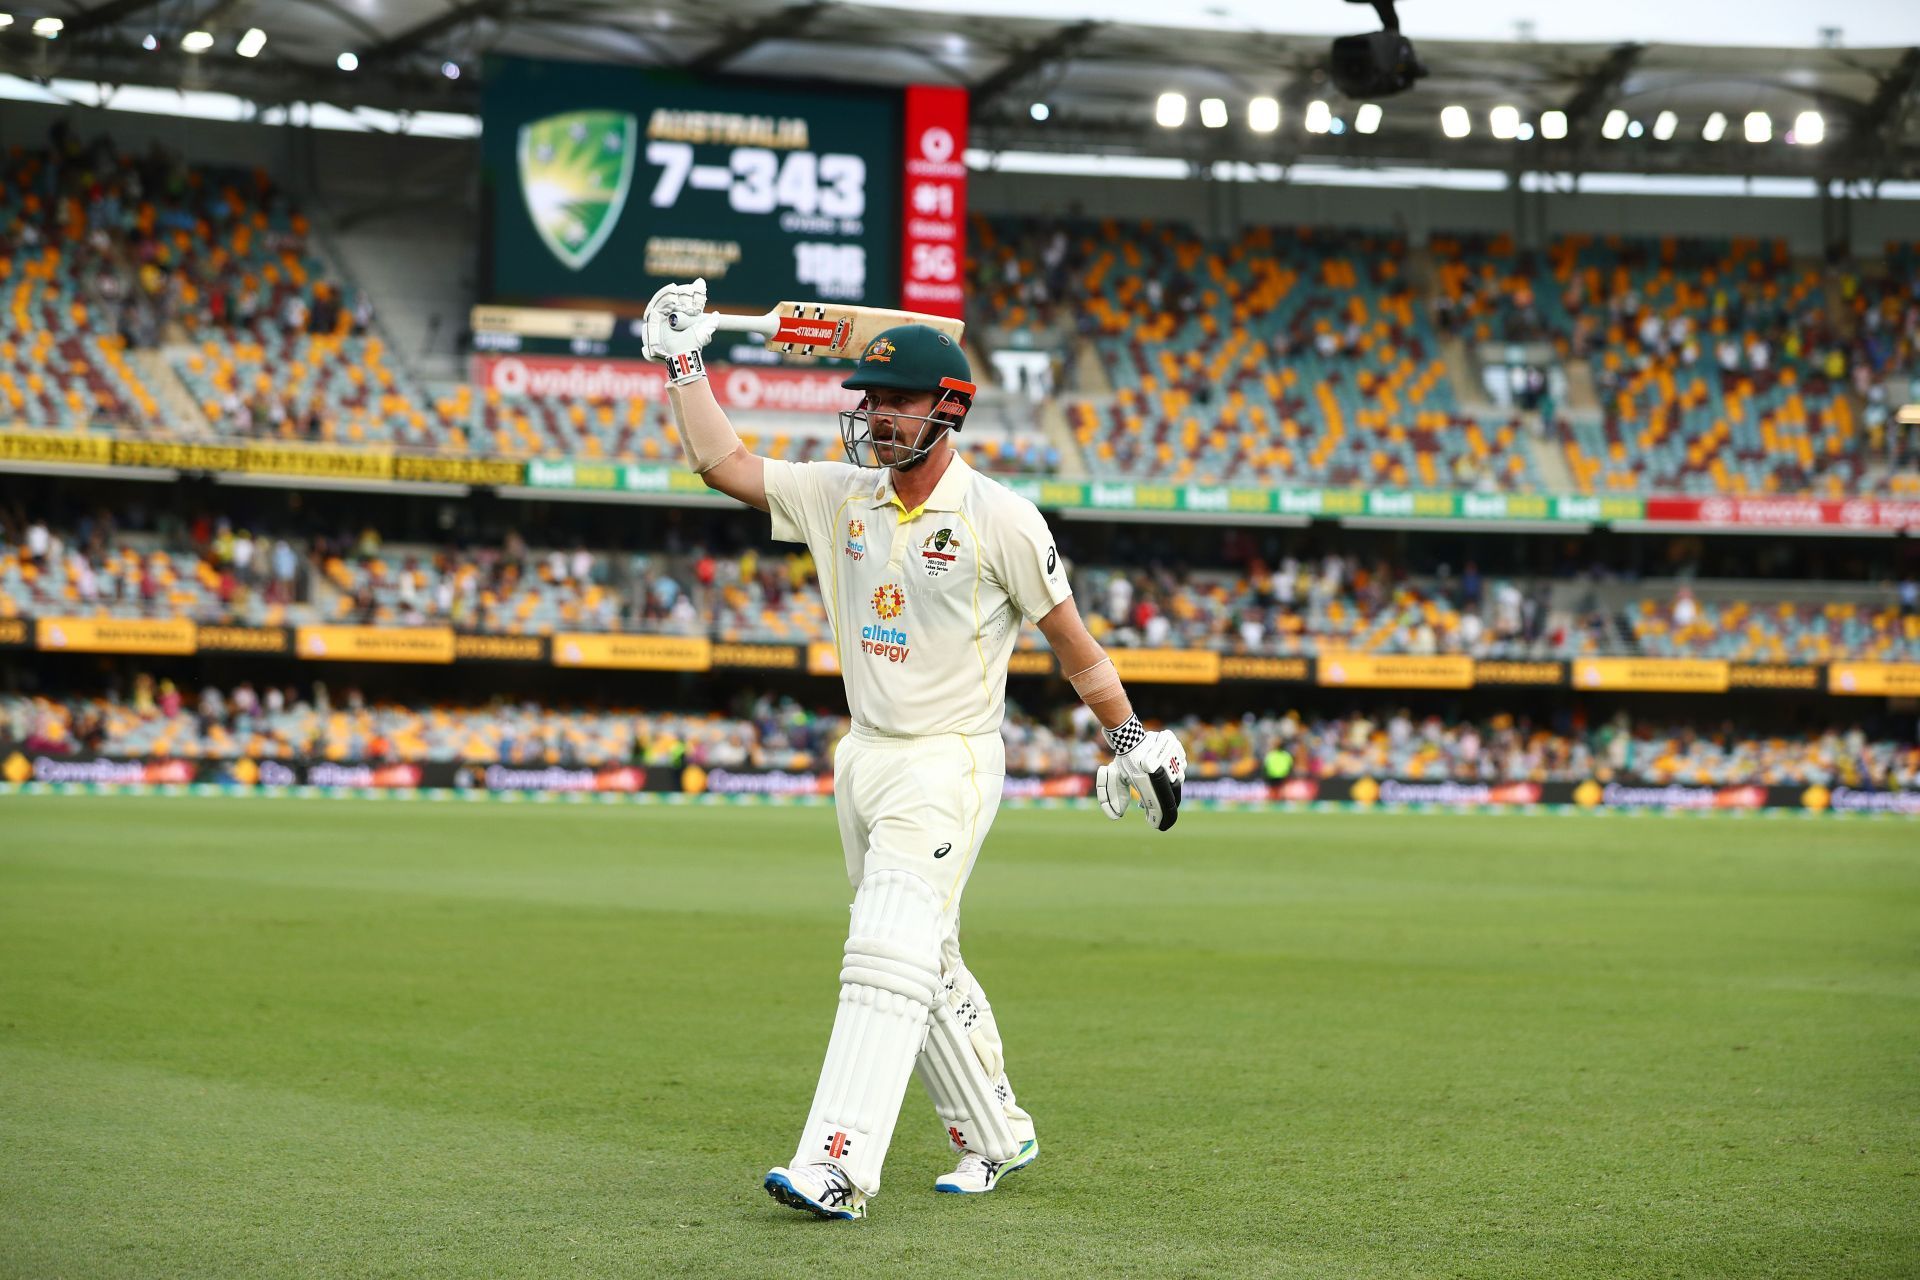 Travis Head set the Gabba on fire with a blazing hundred (Credit: Getty Images)